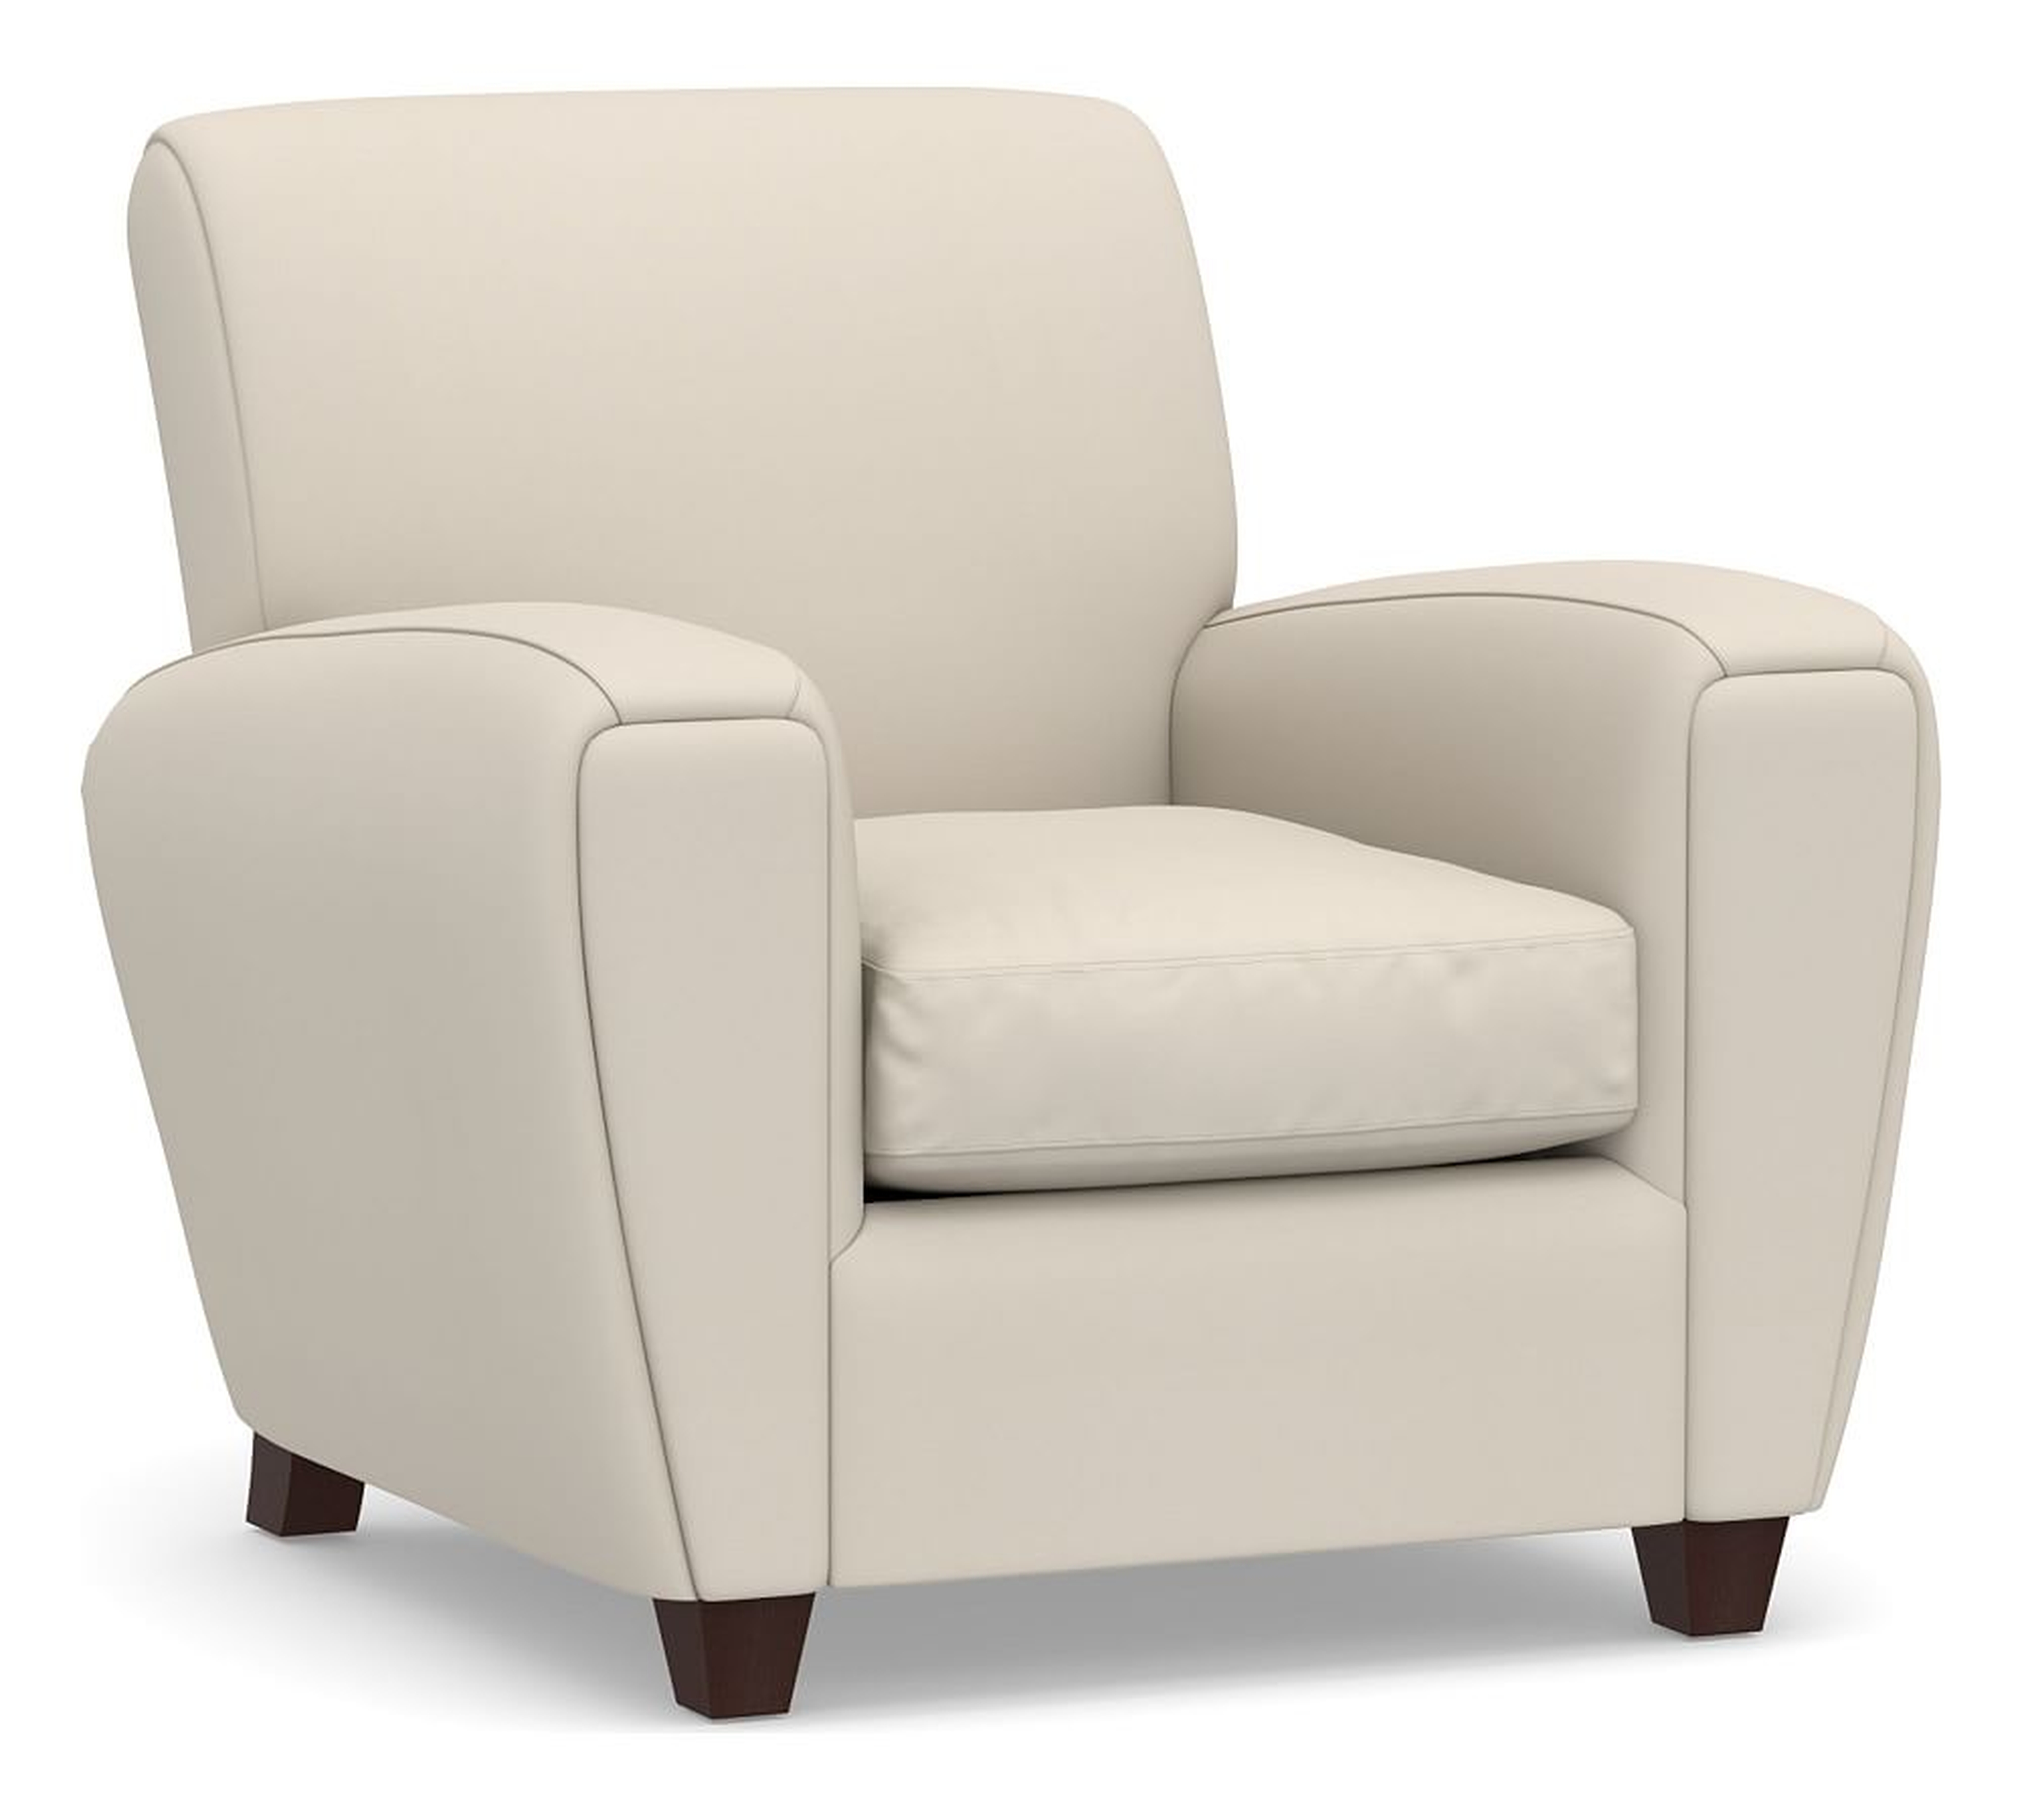 Manhattan Square Arm Upholstered Armchair, Polyester Wrapped Cushions, Twill Cream - Pottery Barn